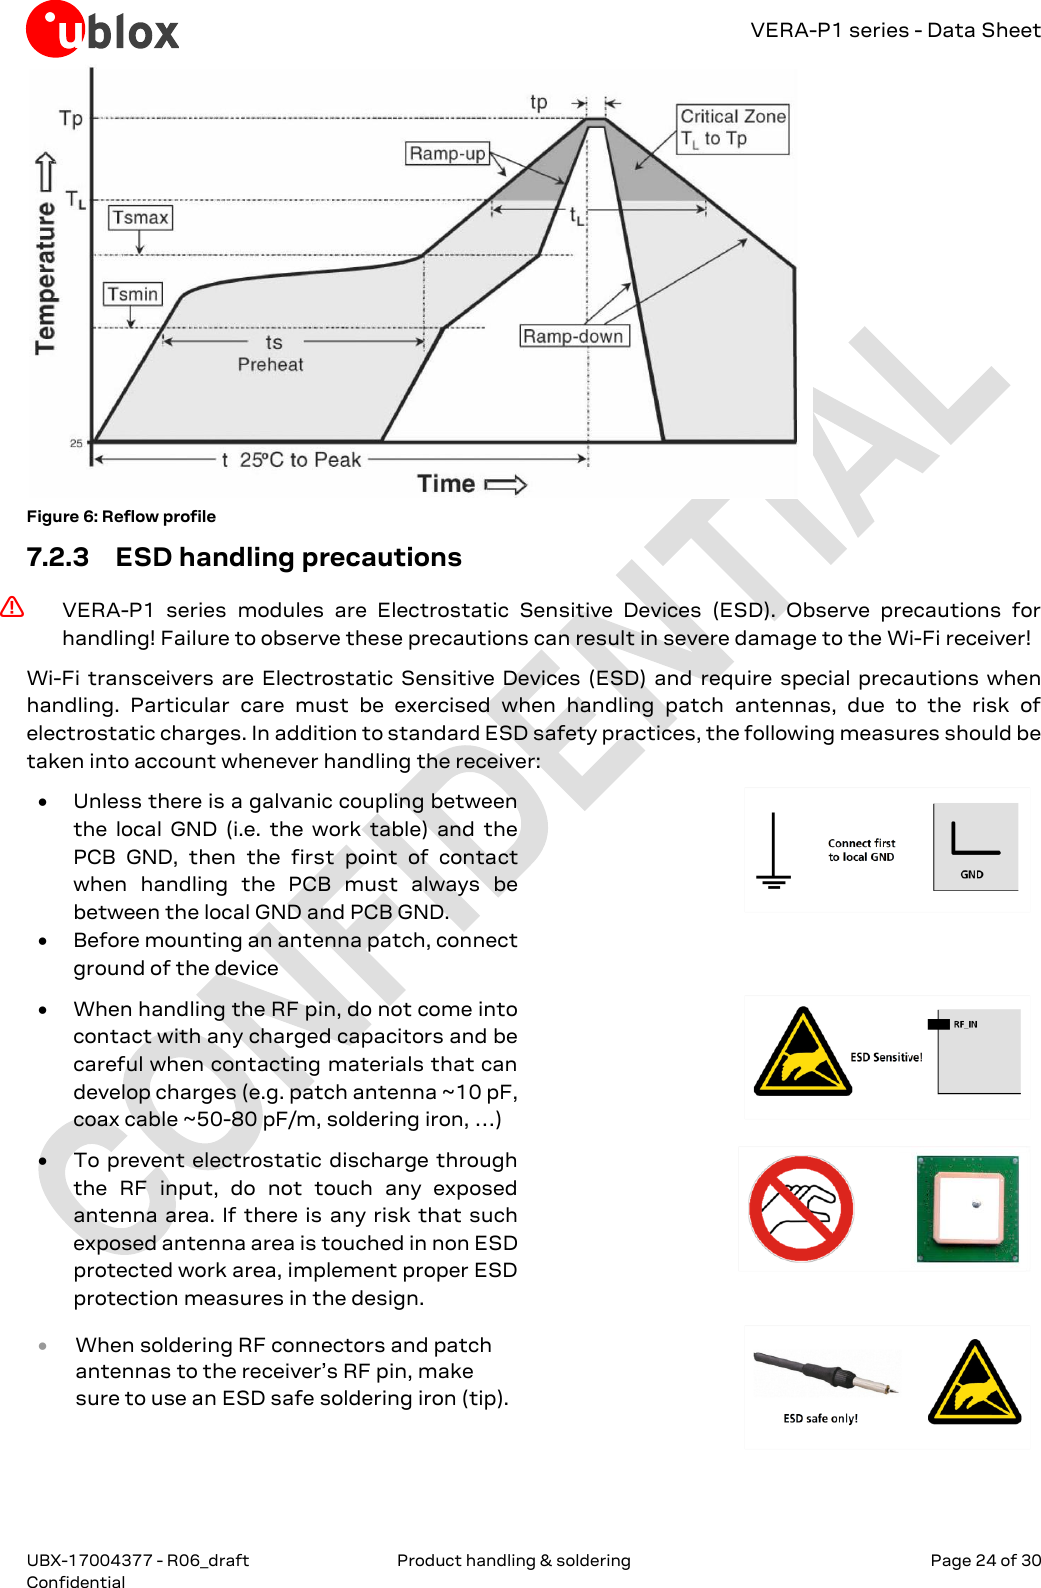 VERA-P1 series - Data Sheet UBX-17004377 - R06_draft  Product handling &amp; soldering   Page 24 of 30 Confidential      Figure 6: Reflow profile 7.2.3 ESD handling precautions ⚠ VERA-P1  series  modules  are  Electrostatic  Sensitive  Devices  (ESD).  Observe  precautions  for handling! Failure to observe these precautions can result in severe damage to the Wi-Fi receiver! Wi-Fi  transceivers  are  Electrostatic Sensitive  Devices  (ESD)  and  require  special precautions when handling.  Particular  care  must  be  exercised  when  handling  patch  antennas,  due  to  the  risk  of electrostatic charges. In addition to standard ESD safety practices, the following measures should be taken into account whenever handling the receiver:  Unless there is a galvanic coupling between the  local  GND  (i.e.  the  work  table)  and  the PCB  GND,  then  the  first  point  of  contact when  handling  the  PCB  must  always  be between the local GND and PCB GND.  Before mounting an antenna patch, connect ground of the device   When handling the RF pin, do not come into contact with any charged capacitors and be careful when contacting materials that can develop charges (e.g. patch antenna ~10 pF, coax cable ~50-80 pF/m, soldering iron, …)   To prevent electrostatic  discharge through the  RF  input,  do  not  touch  any  exposed antenna area.  If there is any  risk that such exposed antenna area is touched in non ESD protected work area, implement proper ESD protection measures in the design.   When soldering RF connectors and patch antennas to the receiver’s RF pin, make sure to use an ESD safe soldering iron (tip).   